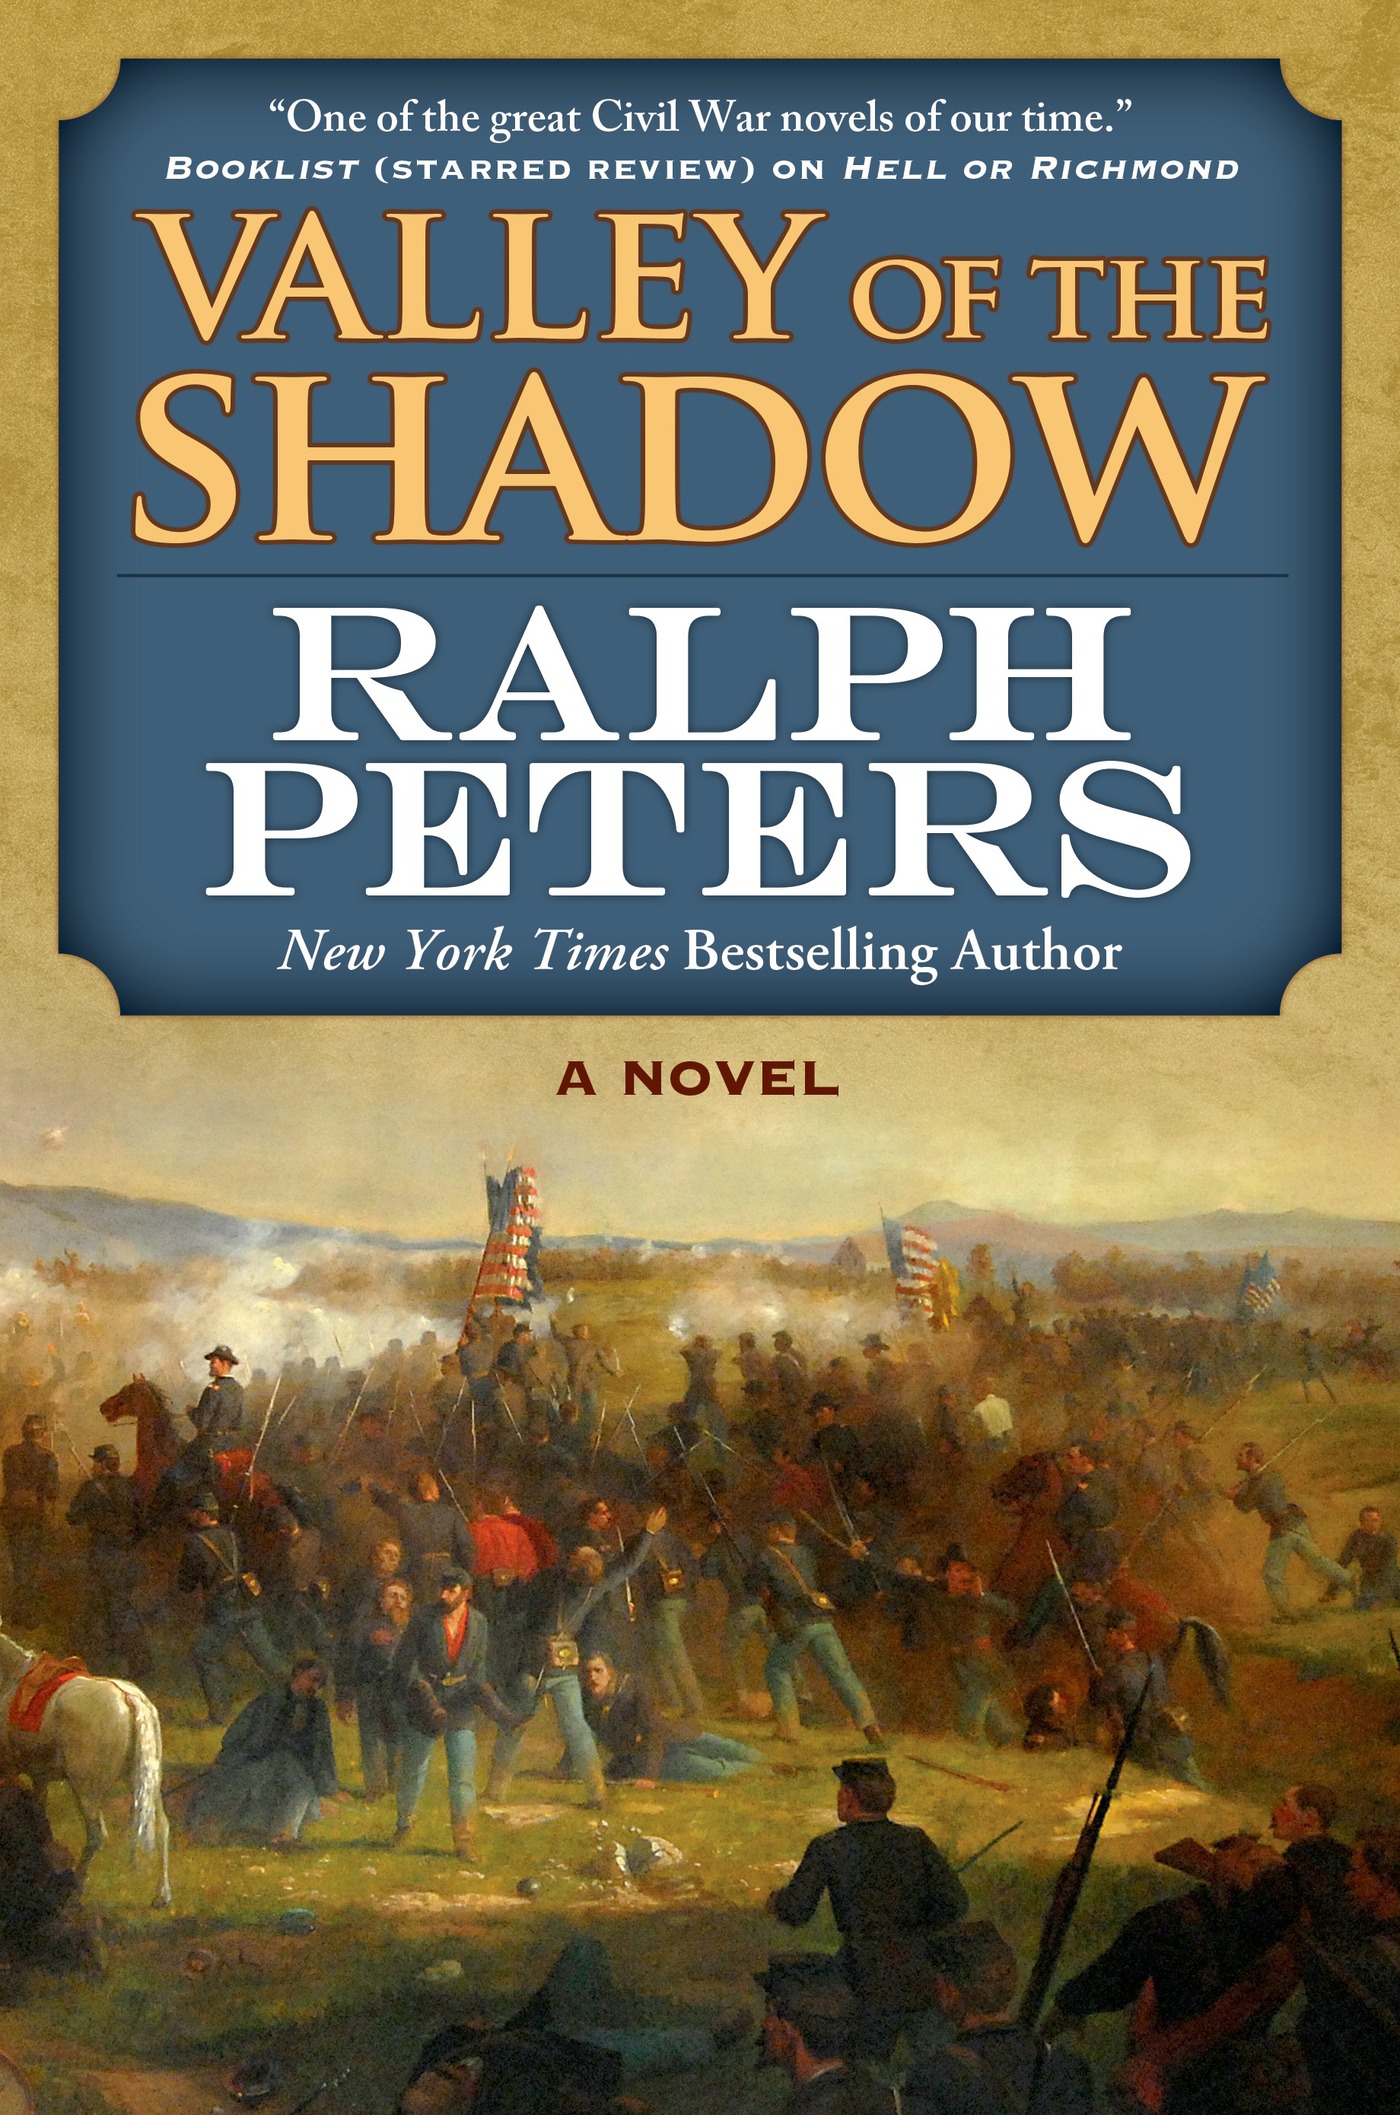 Valley of the Shadow : A Novel by Ralph Peters